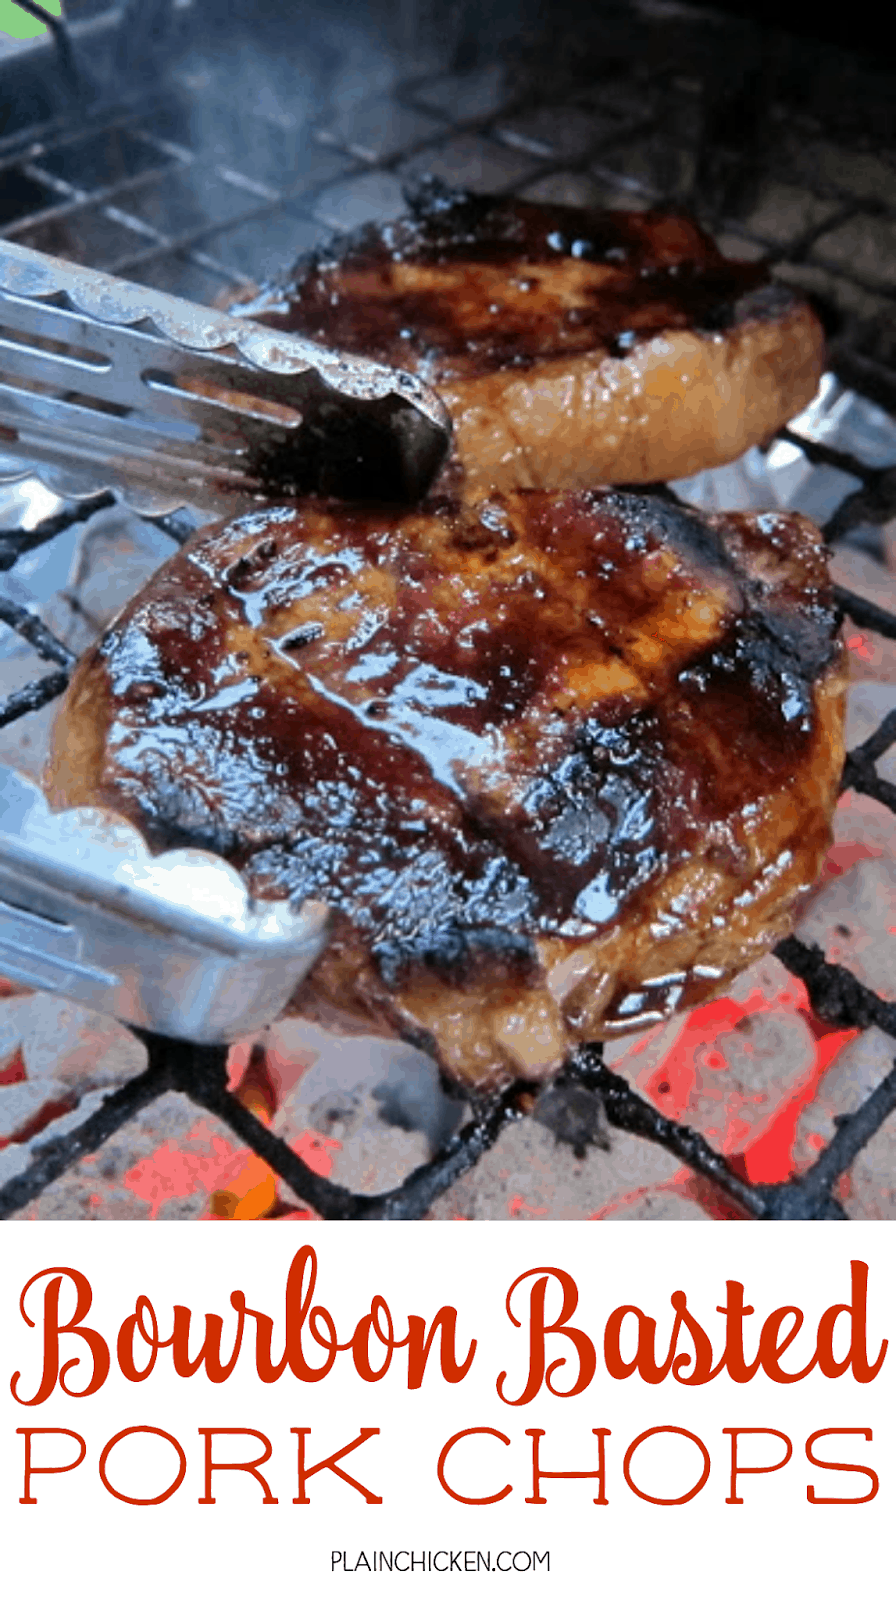 Bourbon Basted Pork Chops - pork chops basted in a quick homemade bourbon sauce - lemon juice, soy sauce, Worcestershire sauce, bourbon, onion, hot sauce and pepper. So easy and really good. A favorite at our BBQ parties!